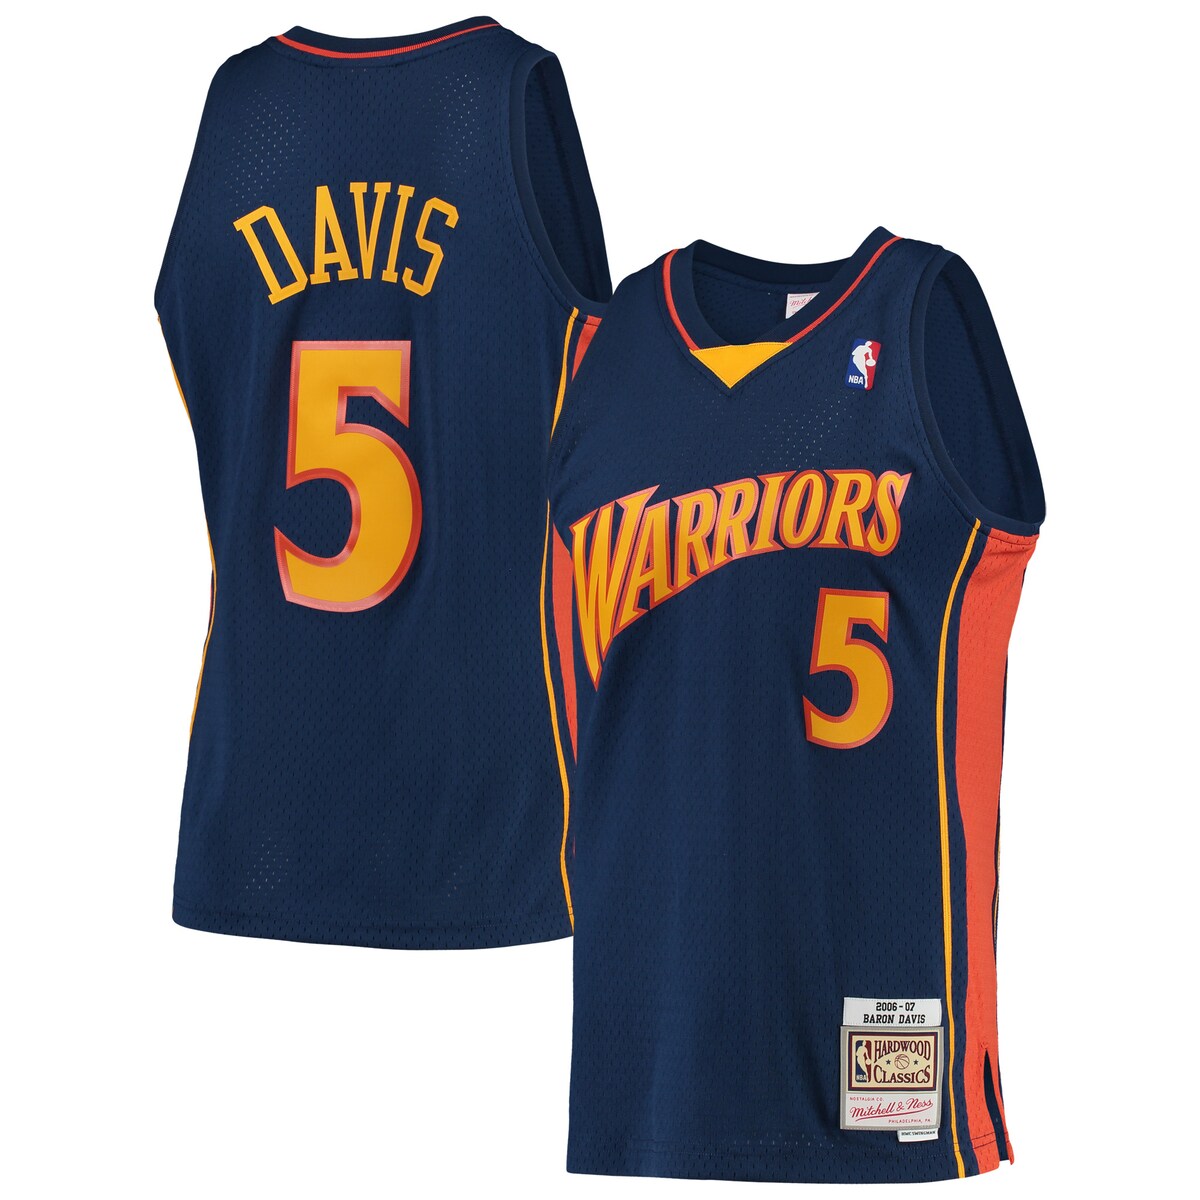 Rep one of your all-time favorite pros with this Baron Davis Swingman jersey from Mitchell & Ness. The throwback Golden State Warriors details are inspired by the franchise's iconic look of days gone by. Every stitch on this jersey is tailored to exact team specifications, delivering outstanding quality and a premium feel.Woven tag with player detailsOfficially licensedMaterial: 100% PolyesterRib-knit collar and arm openingsSwingman ThrowbackHeat-sealed NBA logoMachine wash, line dryImportedCrew neckMesh fabricBrand: Mitchell & NessTackle twill graphicsSide splits at waist hemWoven jock tagSleeveless